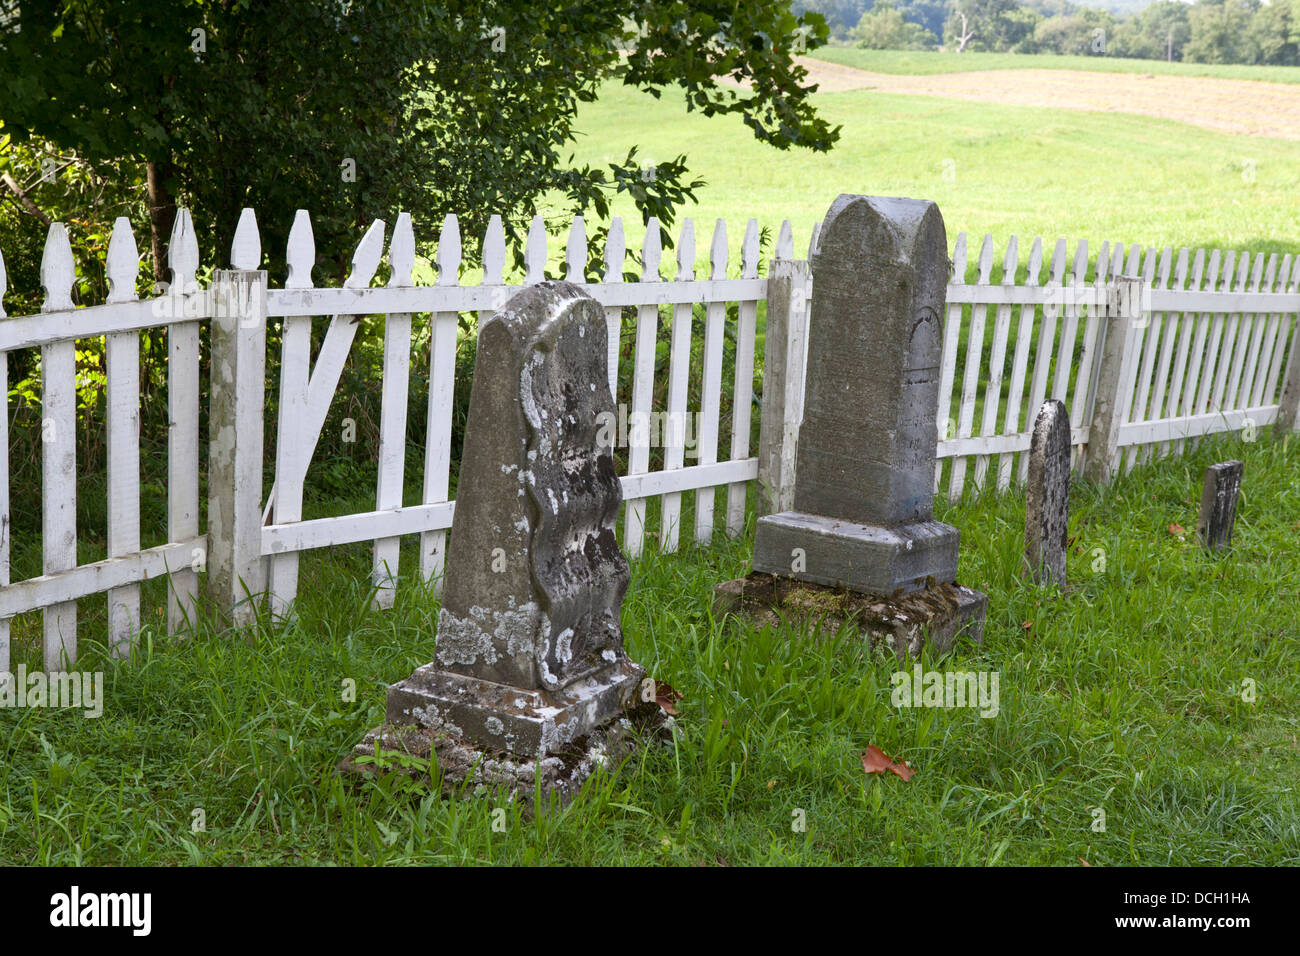 Grave markers with white picket fence in the background (Malabar Historic Farm State Park, Ohio) Stock Photo